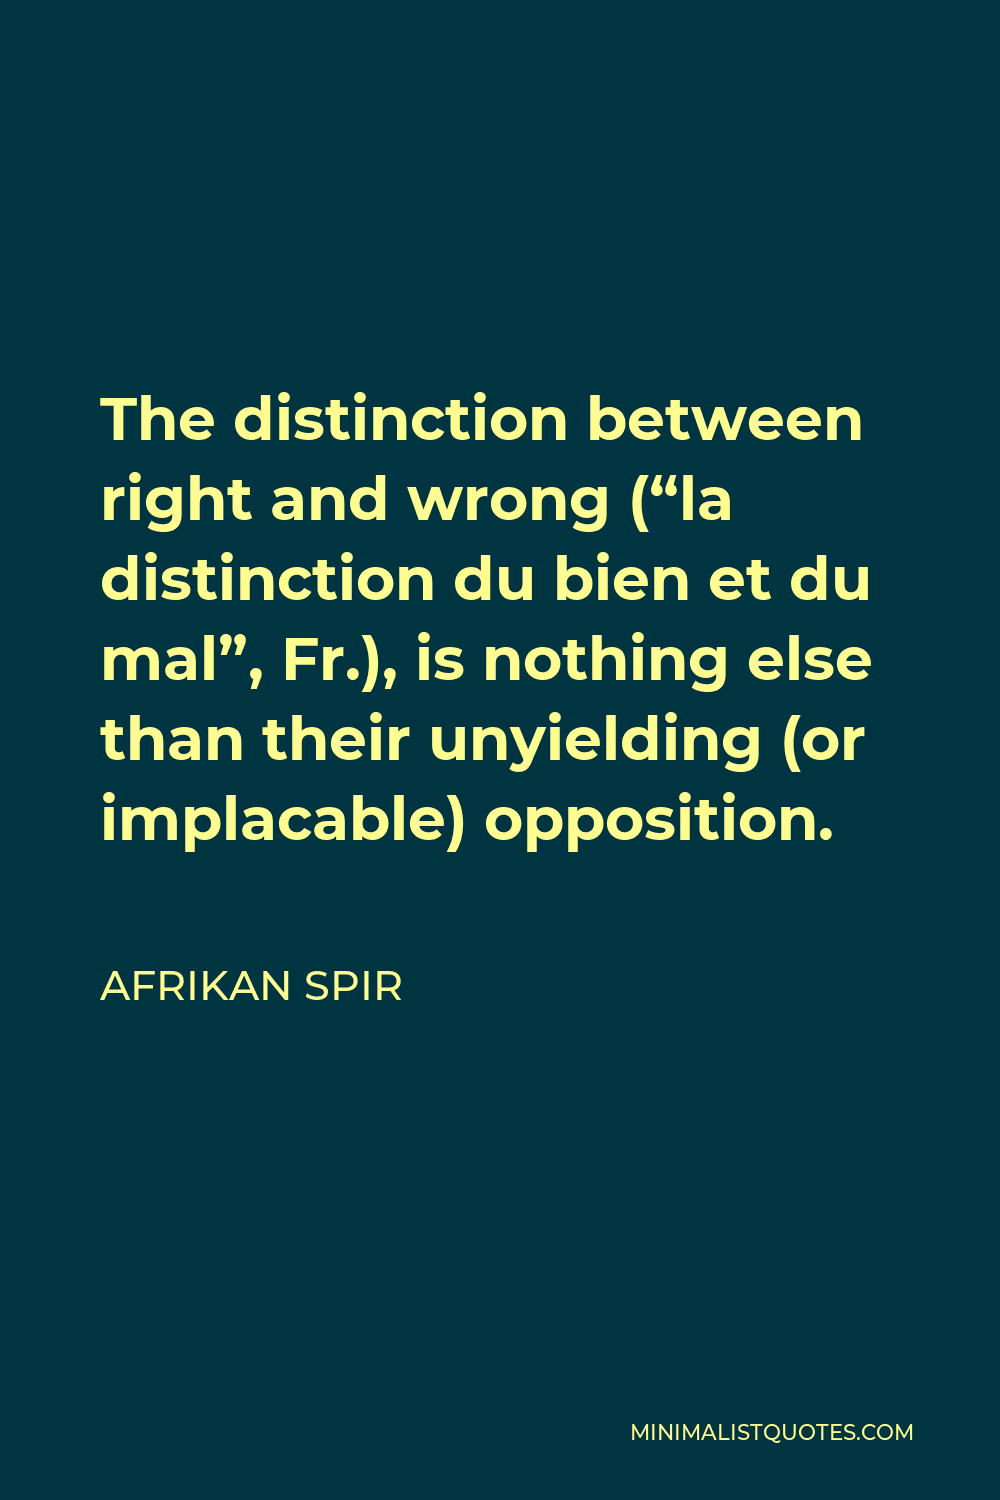 Afrikan Spir Quote - The distinction between right and wrong (“la distinction du bien et du mal”, Fr.), is nothing else than their unyielding (or implacable) opposition.